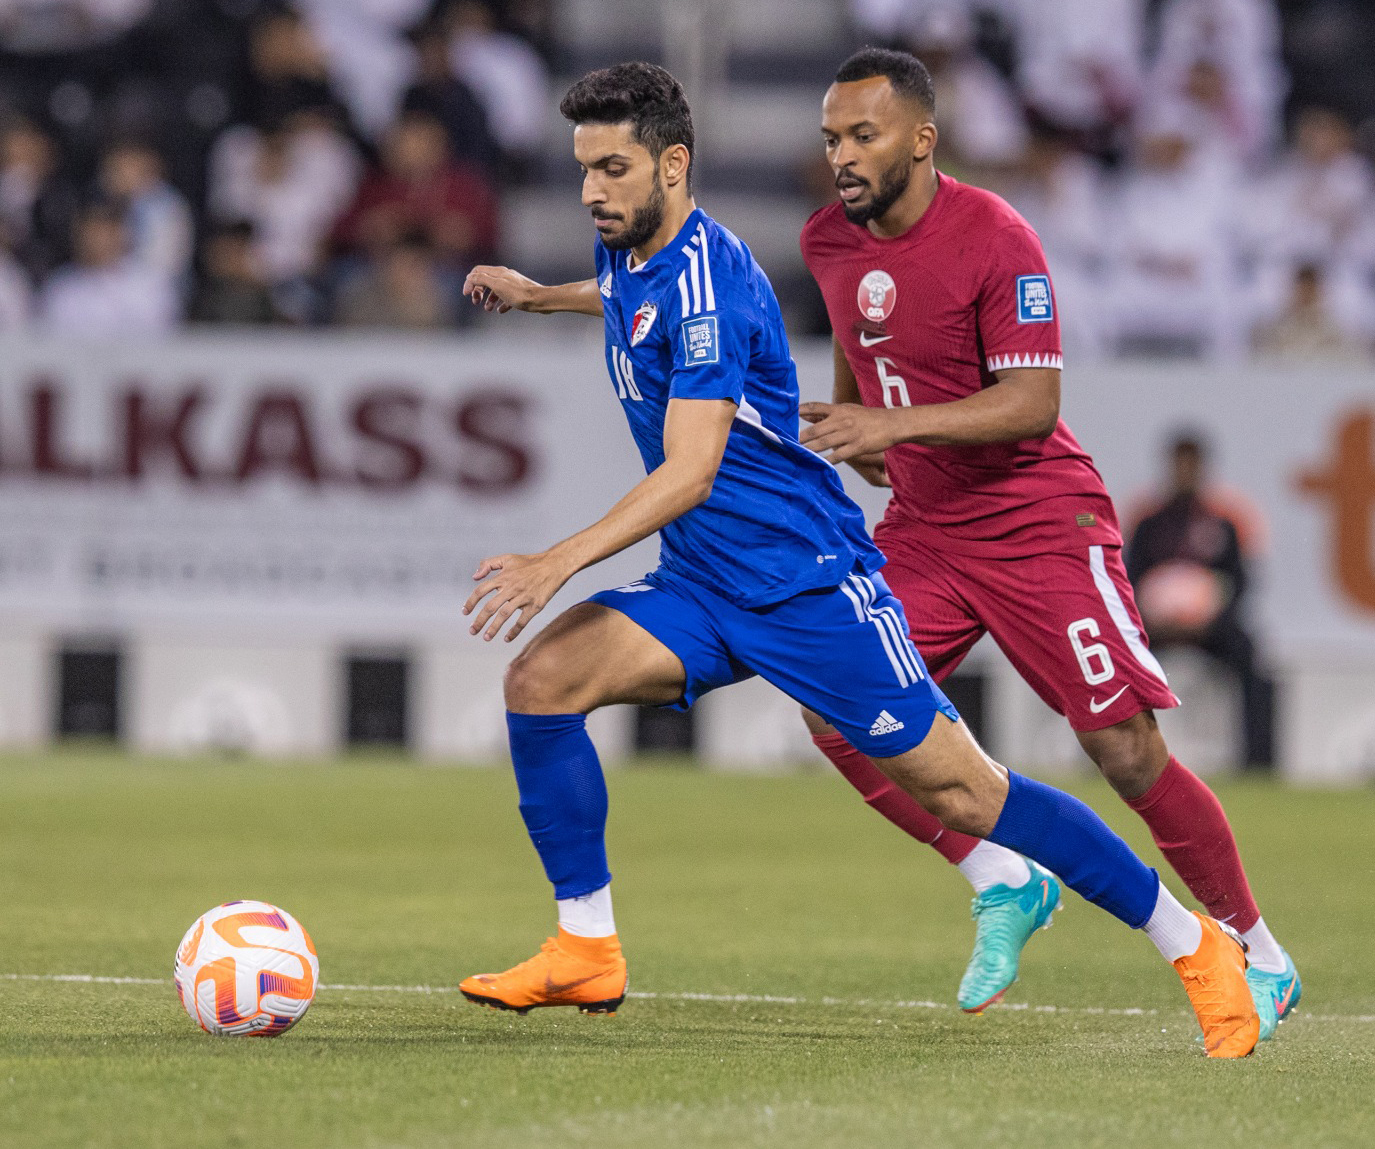 Kuwait's team lose against Qatar 0-3 in qualifications for world, AFC cups
